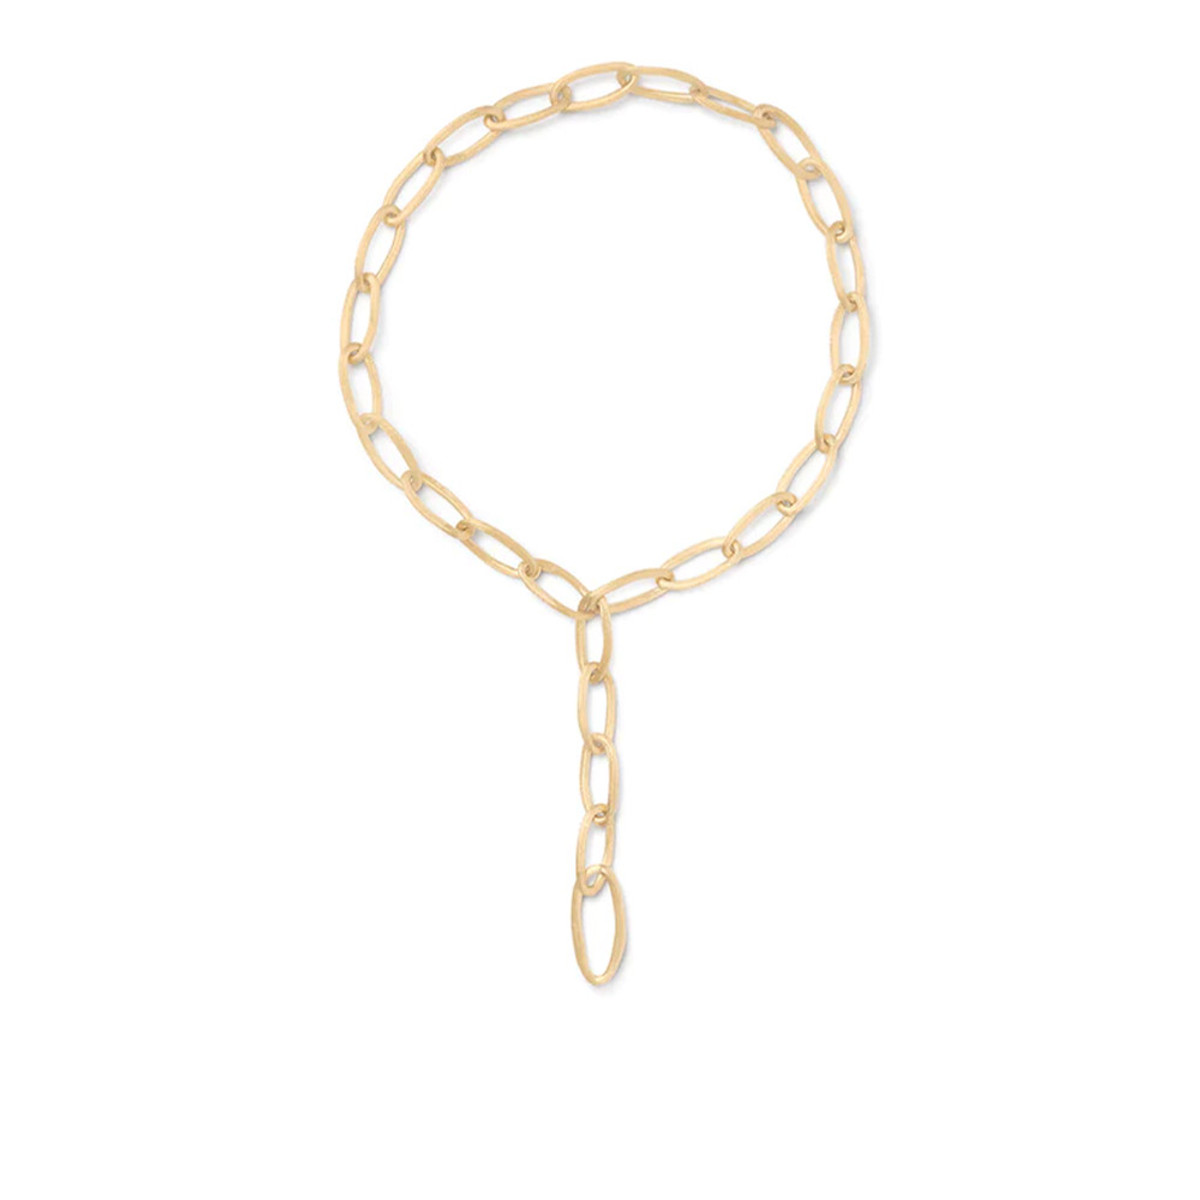 Marco Bicego Jaipur Link Collection 18K Yellow Gold Oval Link Convertible Lariat Necklace-44440 Product Image